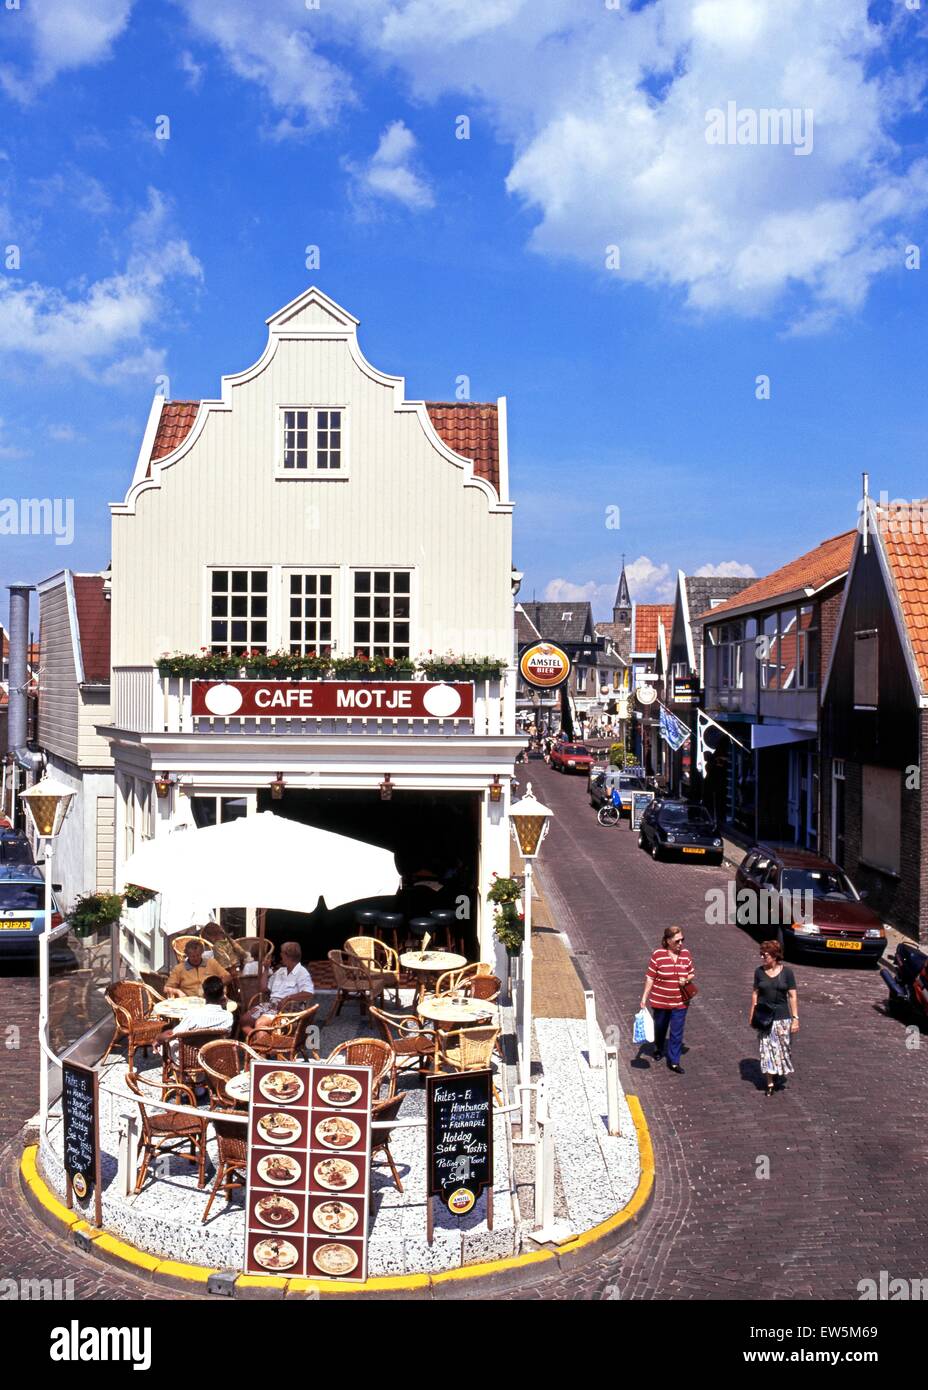 Pavement cafe on the corner of two streets, Volendam, Holland, Netherlands, Europe. Stock Photo